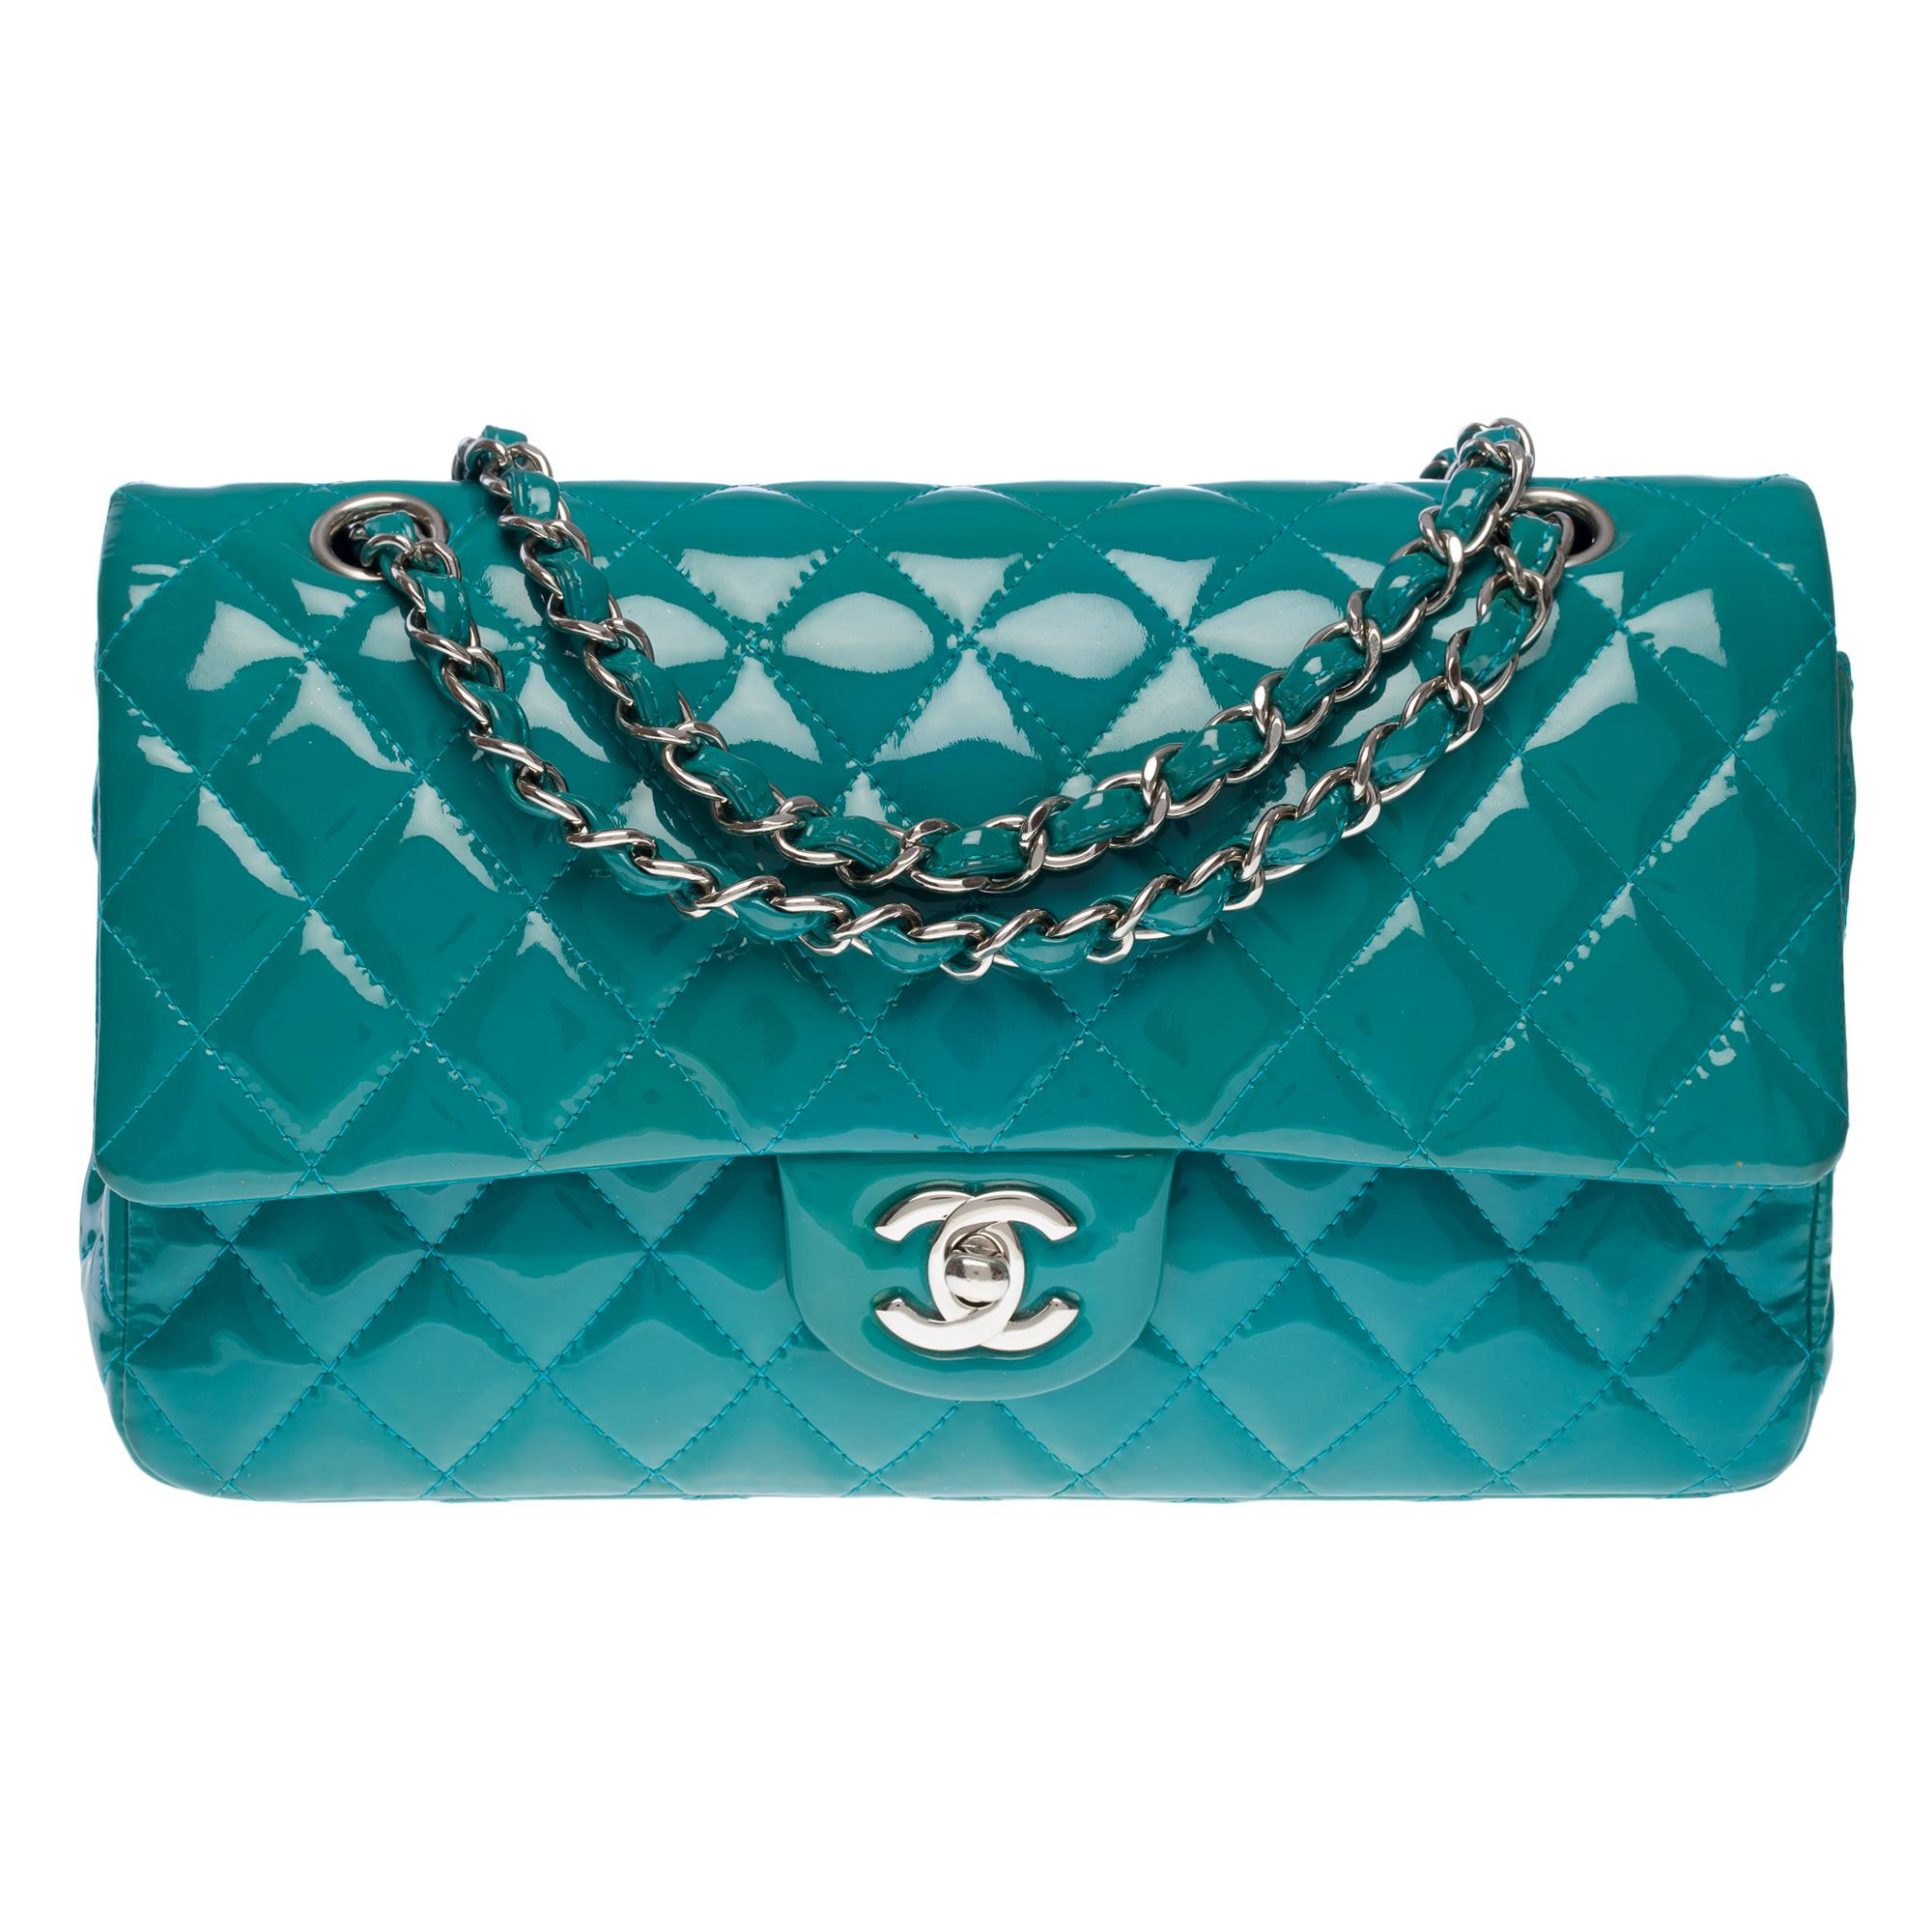 Stunning Chanel Timeless double flap shoulder bag in Turquoise quilted patent leather, silver metal hardware, a silver metal chain handle intertwined with turquoise patent leather for hand or shoulder or crossbody carry

Silver metal CC closure on